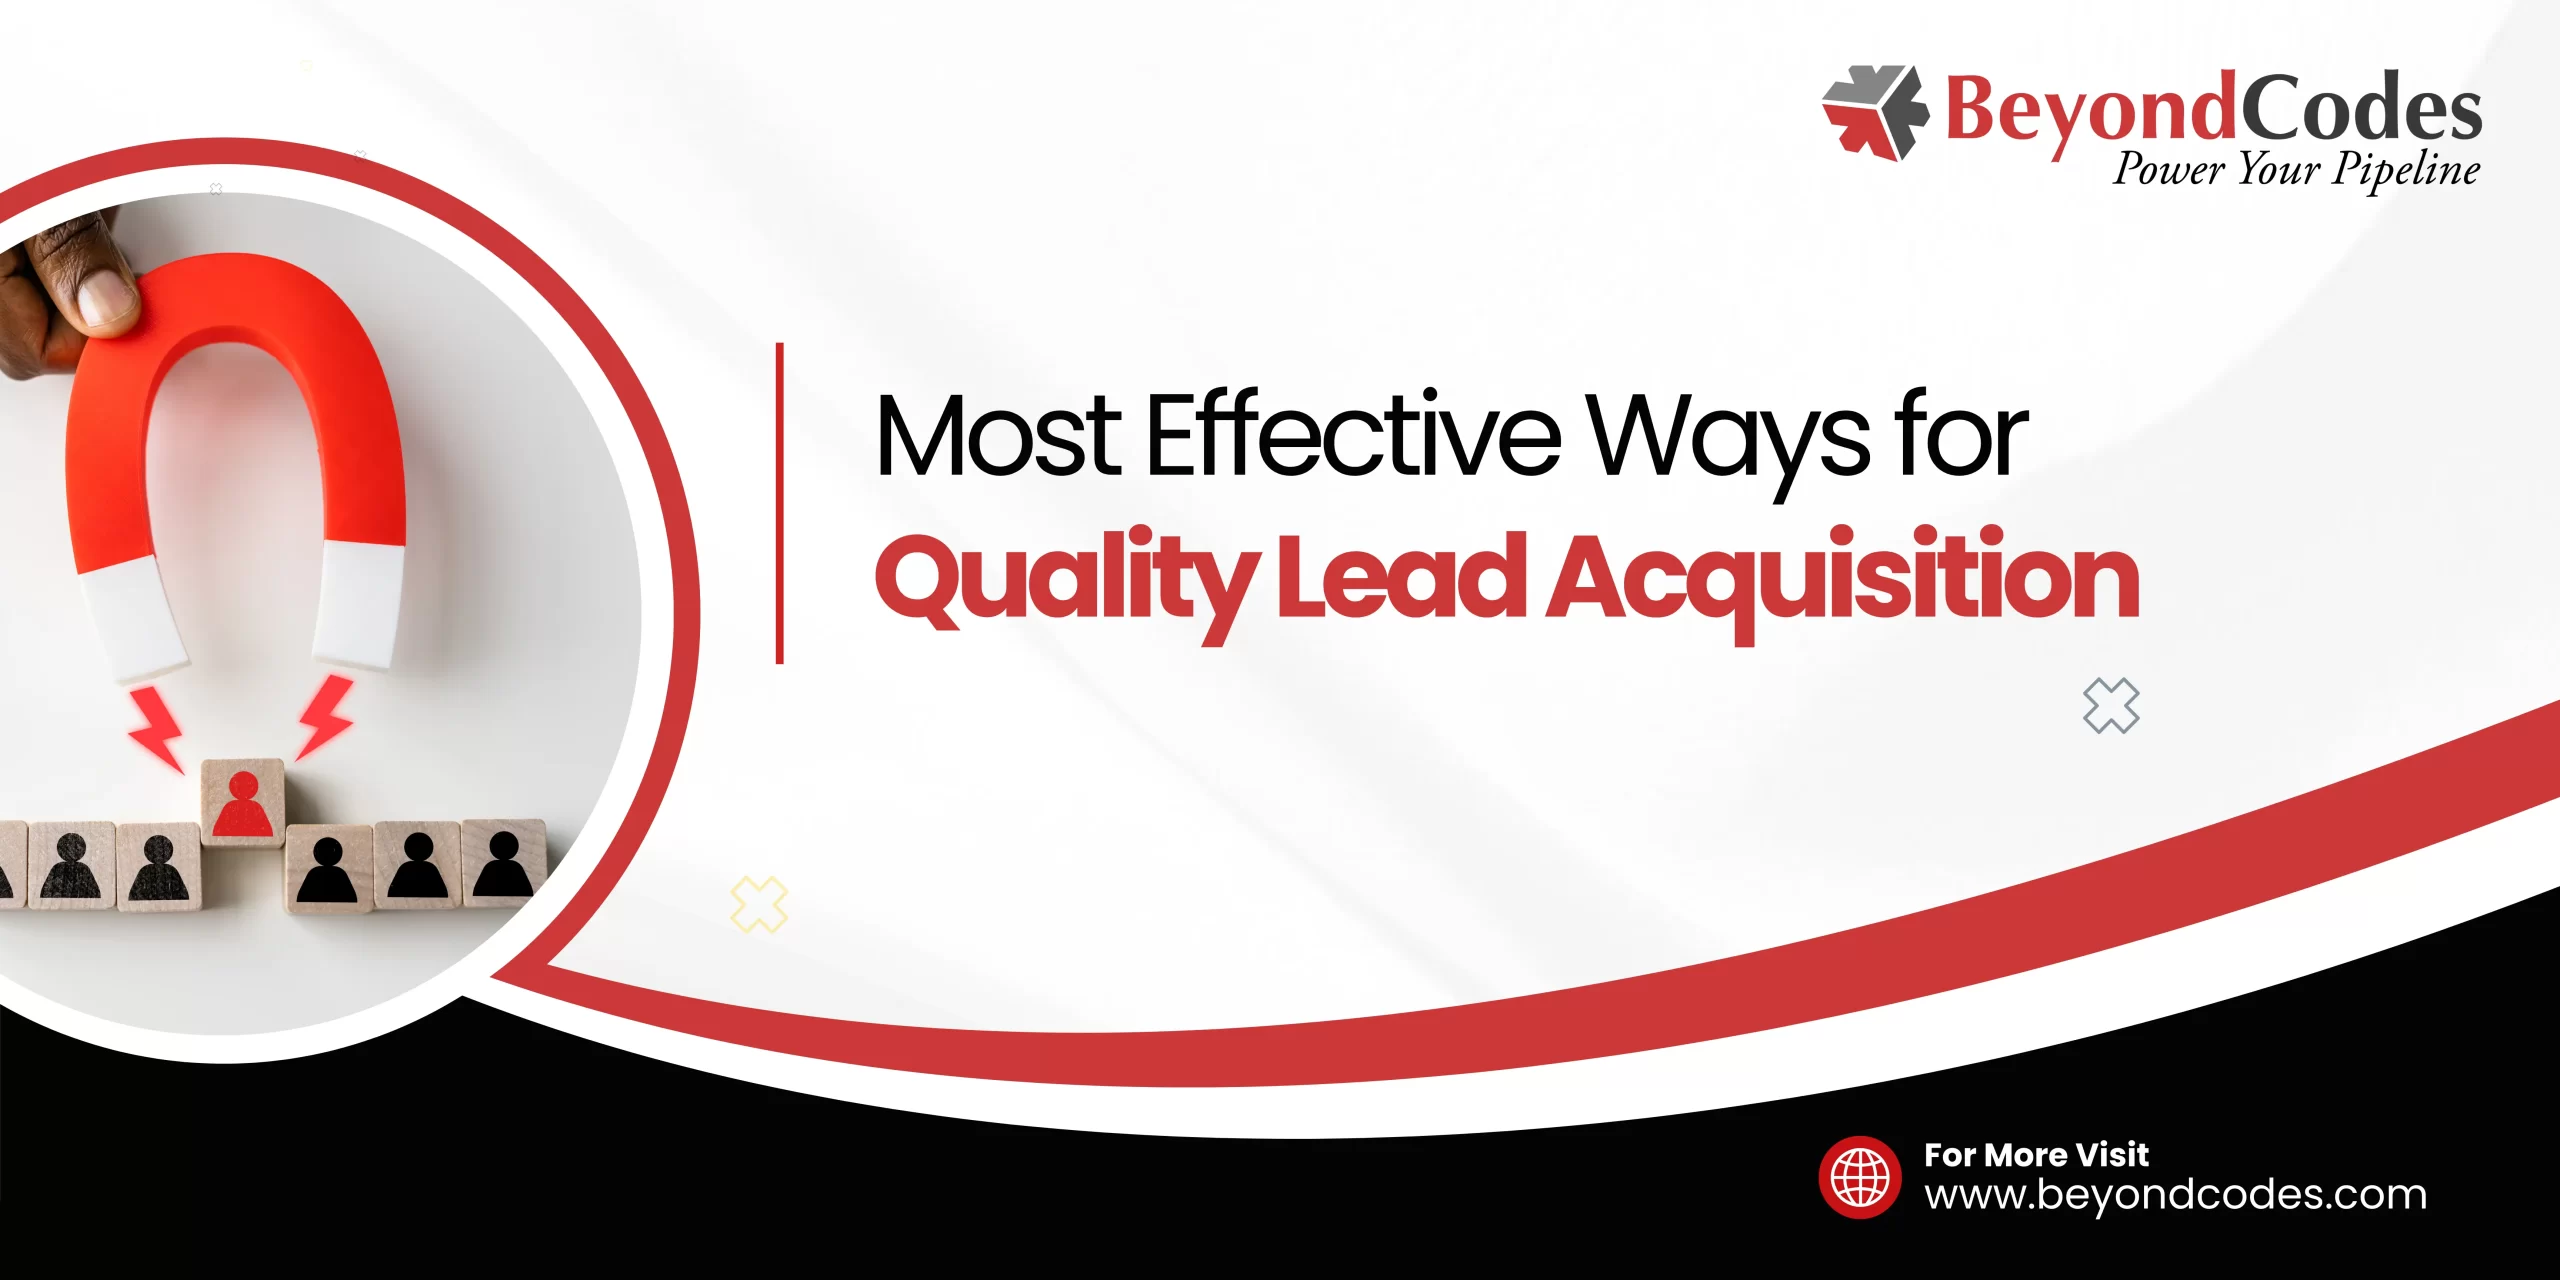 Most Effective Ways for Quality Lead Acquisition